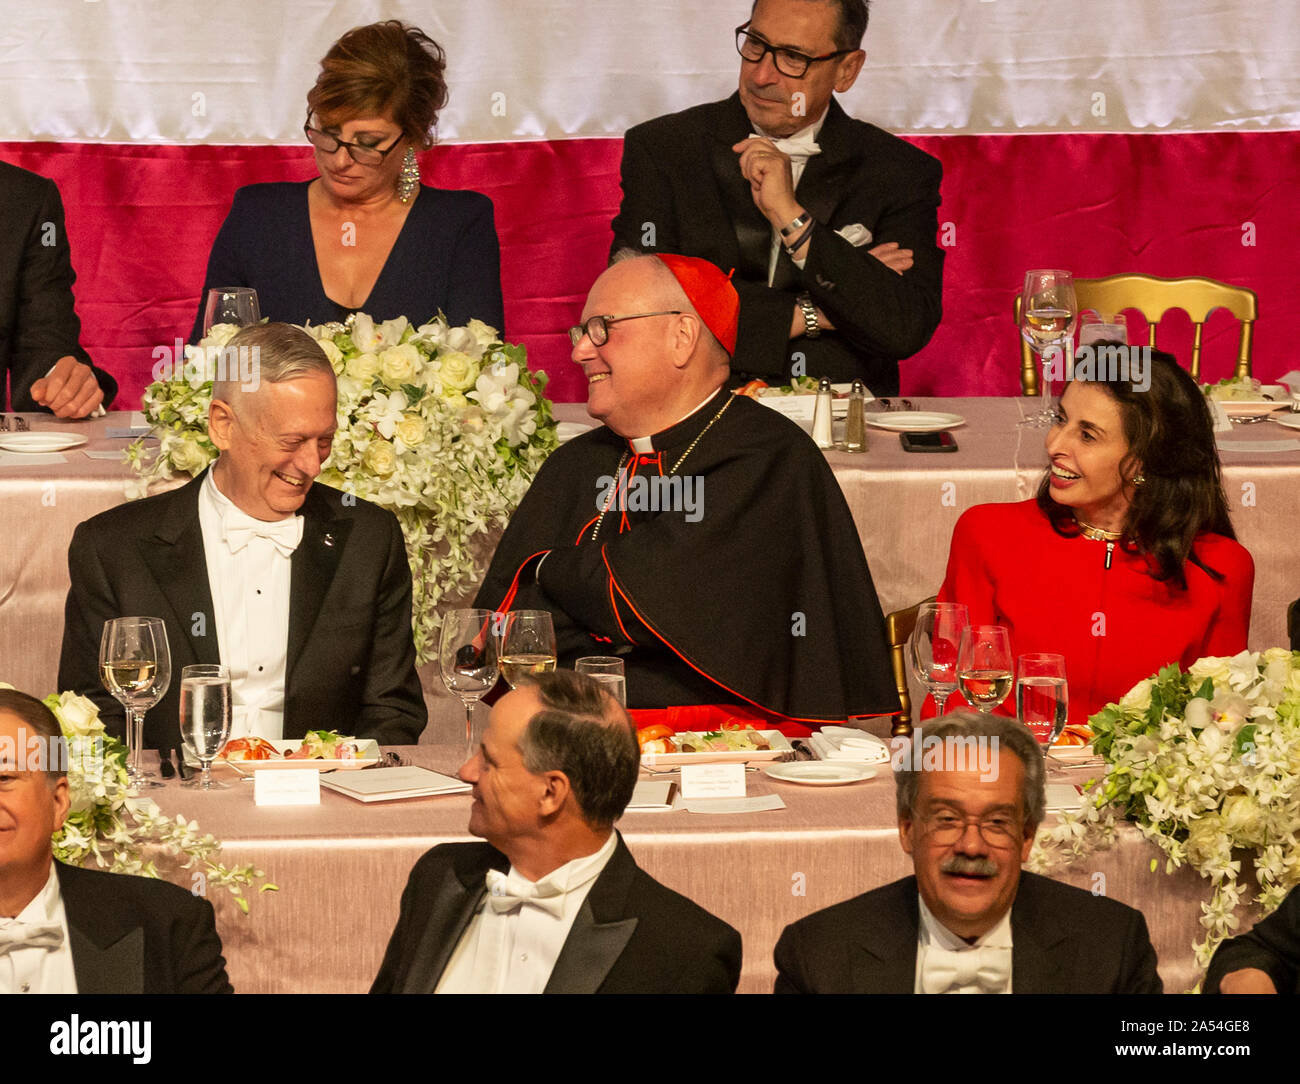 New York, NY - October 17, 2019: General Jim Mattis, Timothy Cardinal Dolan, Mary Ann Tighe attend 74th Annual Alfred E. Smith Memorial Foundation Dinner at Hilton Midtown Stock Photo